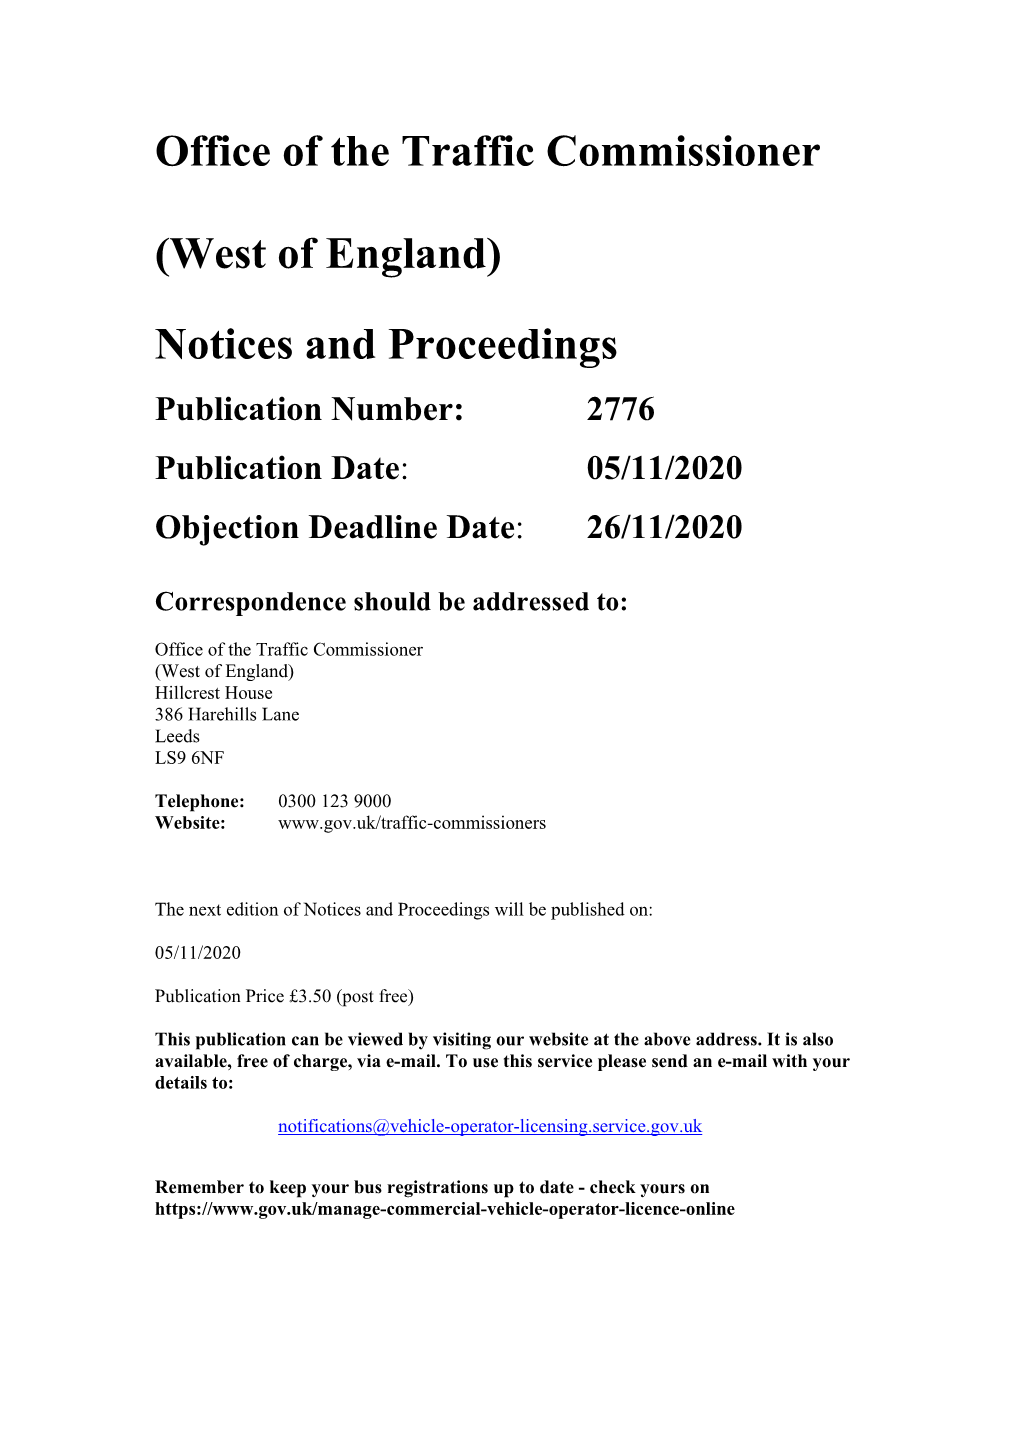 Notices and Proceedings for the West of England 2776